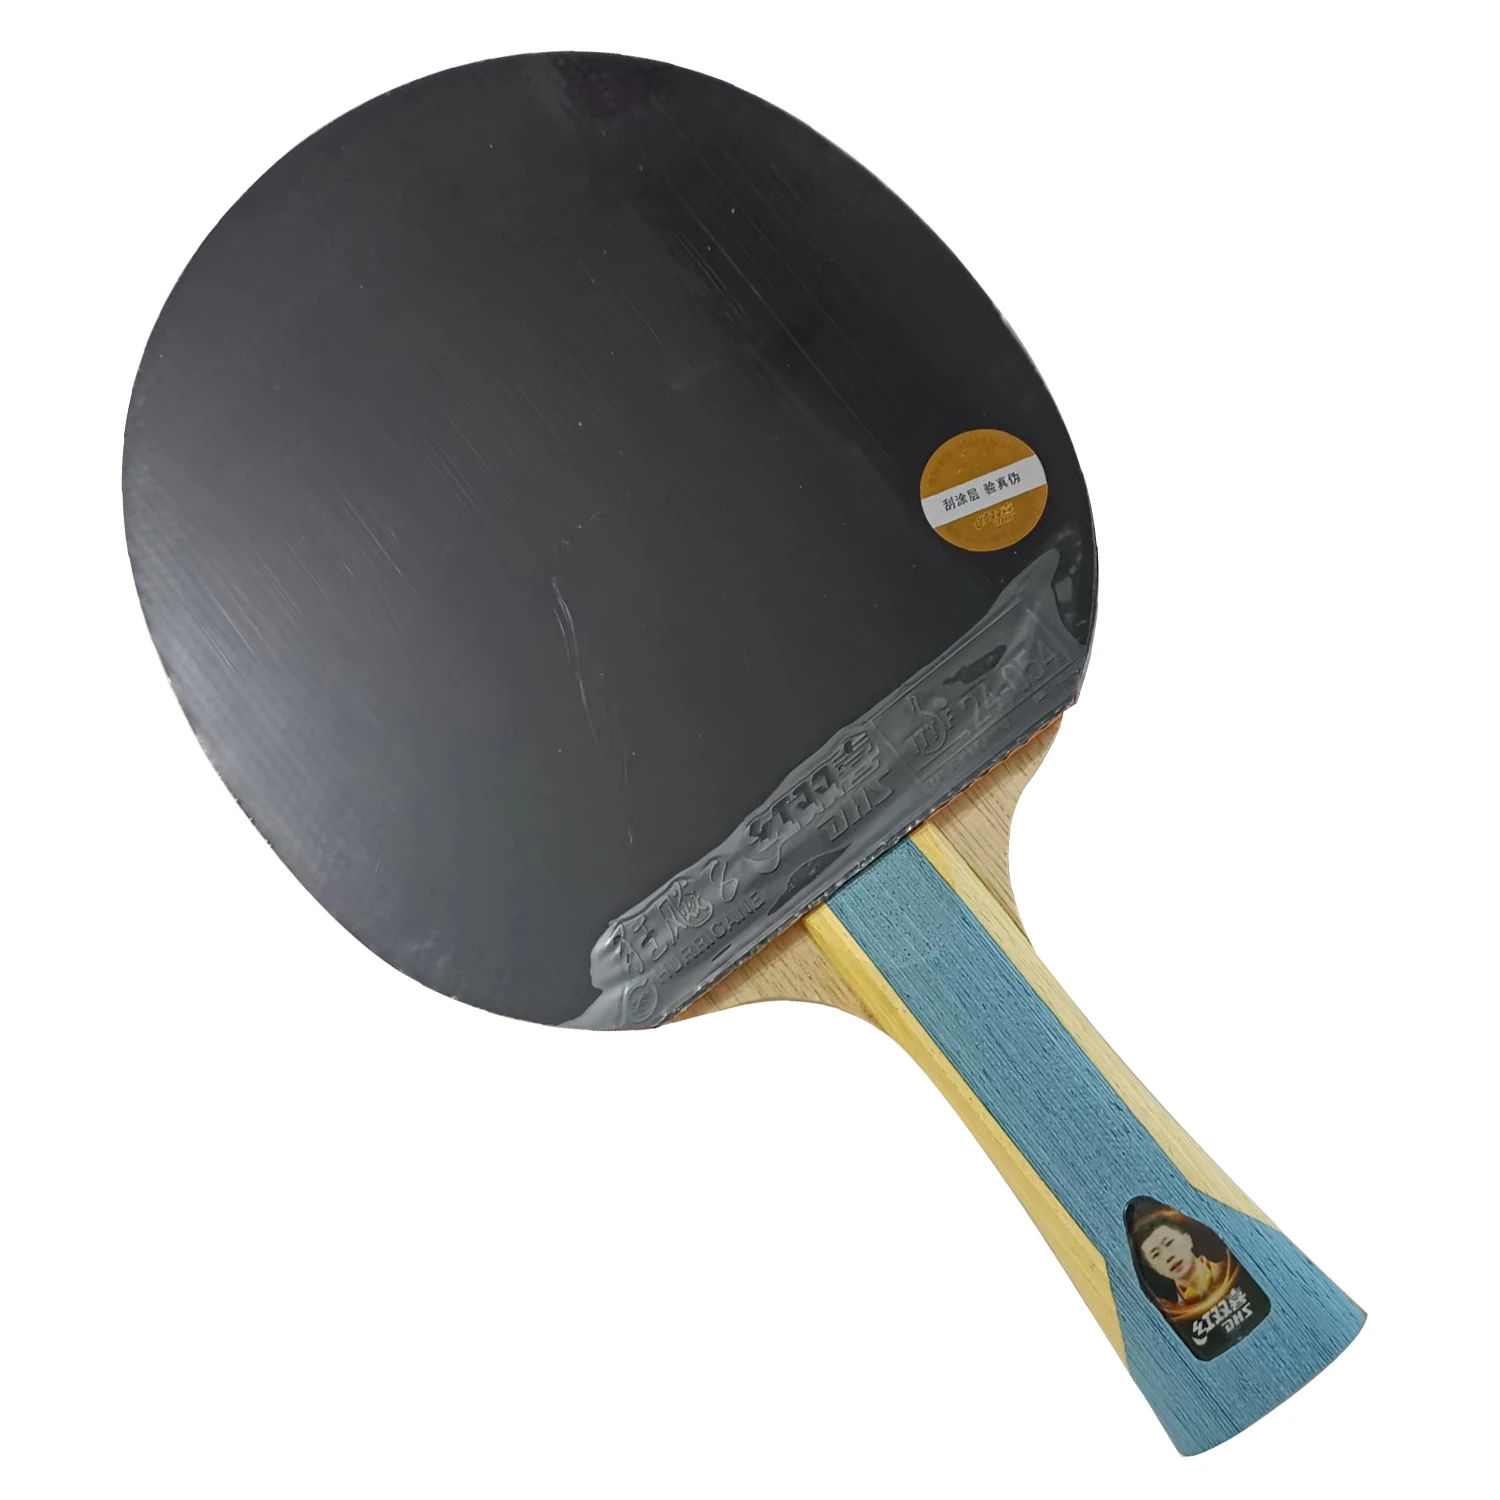 DHS 6002 6006 6 STAR Shakehand Table Tennis Racket (Shakehand) with Case for Ping Pong